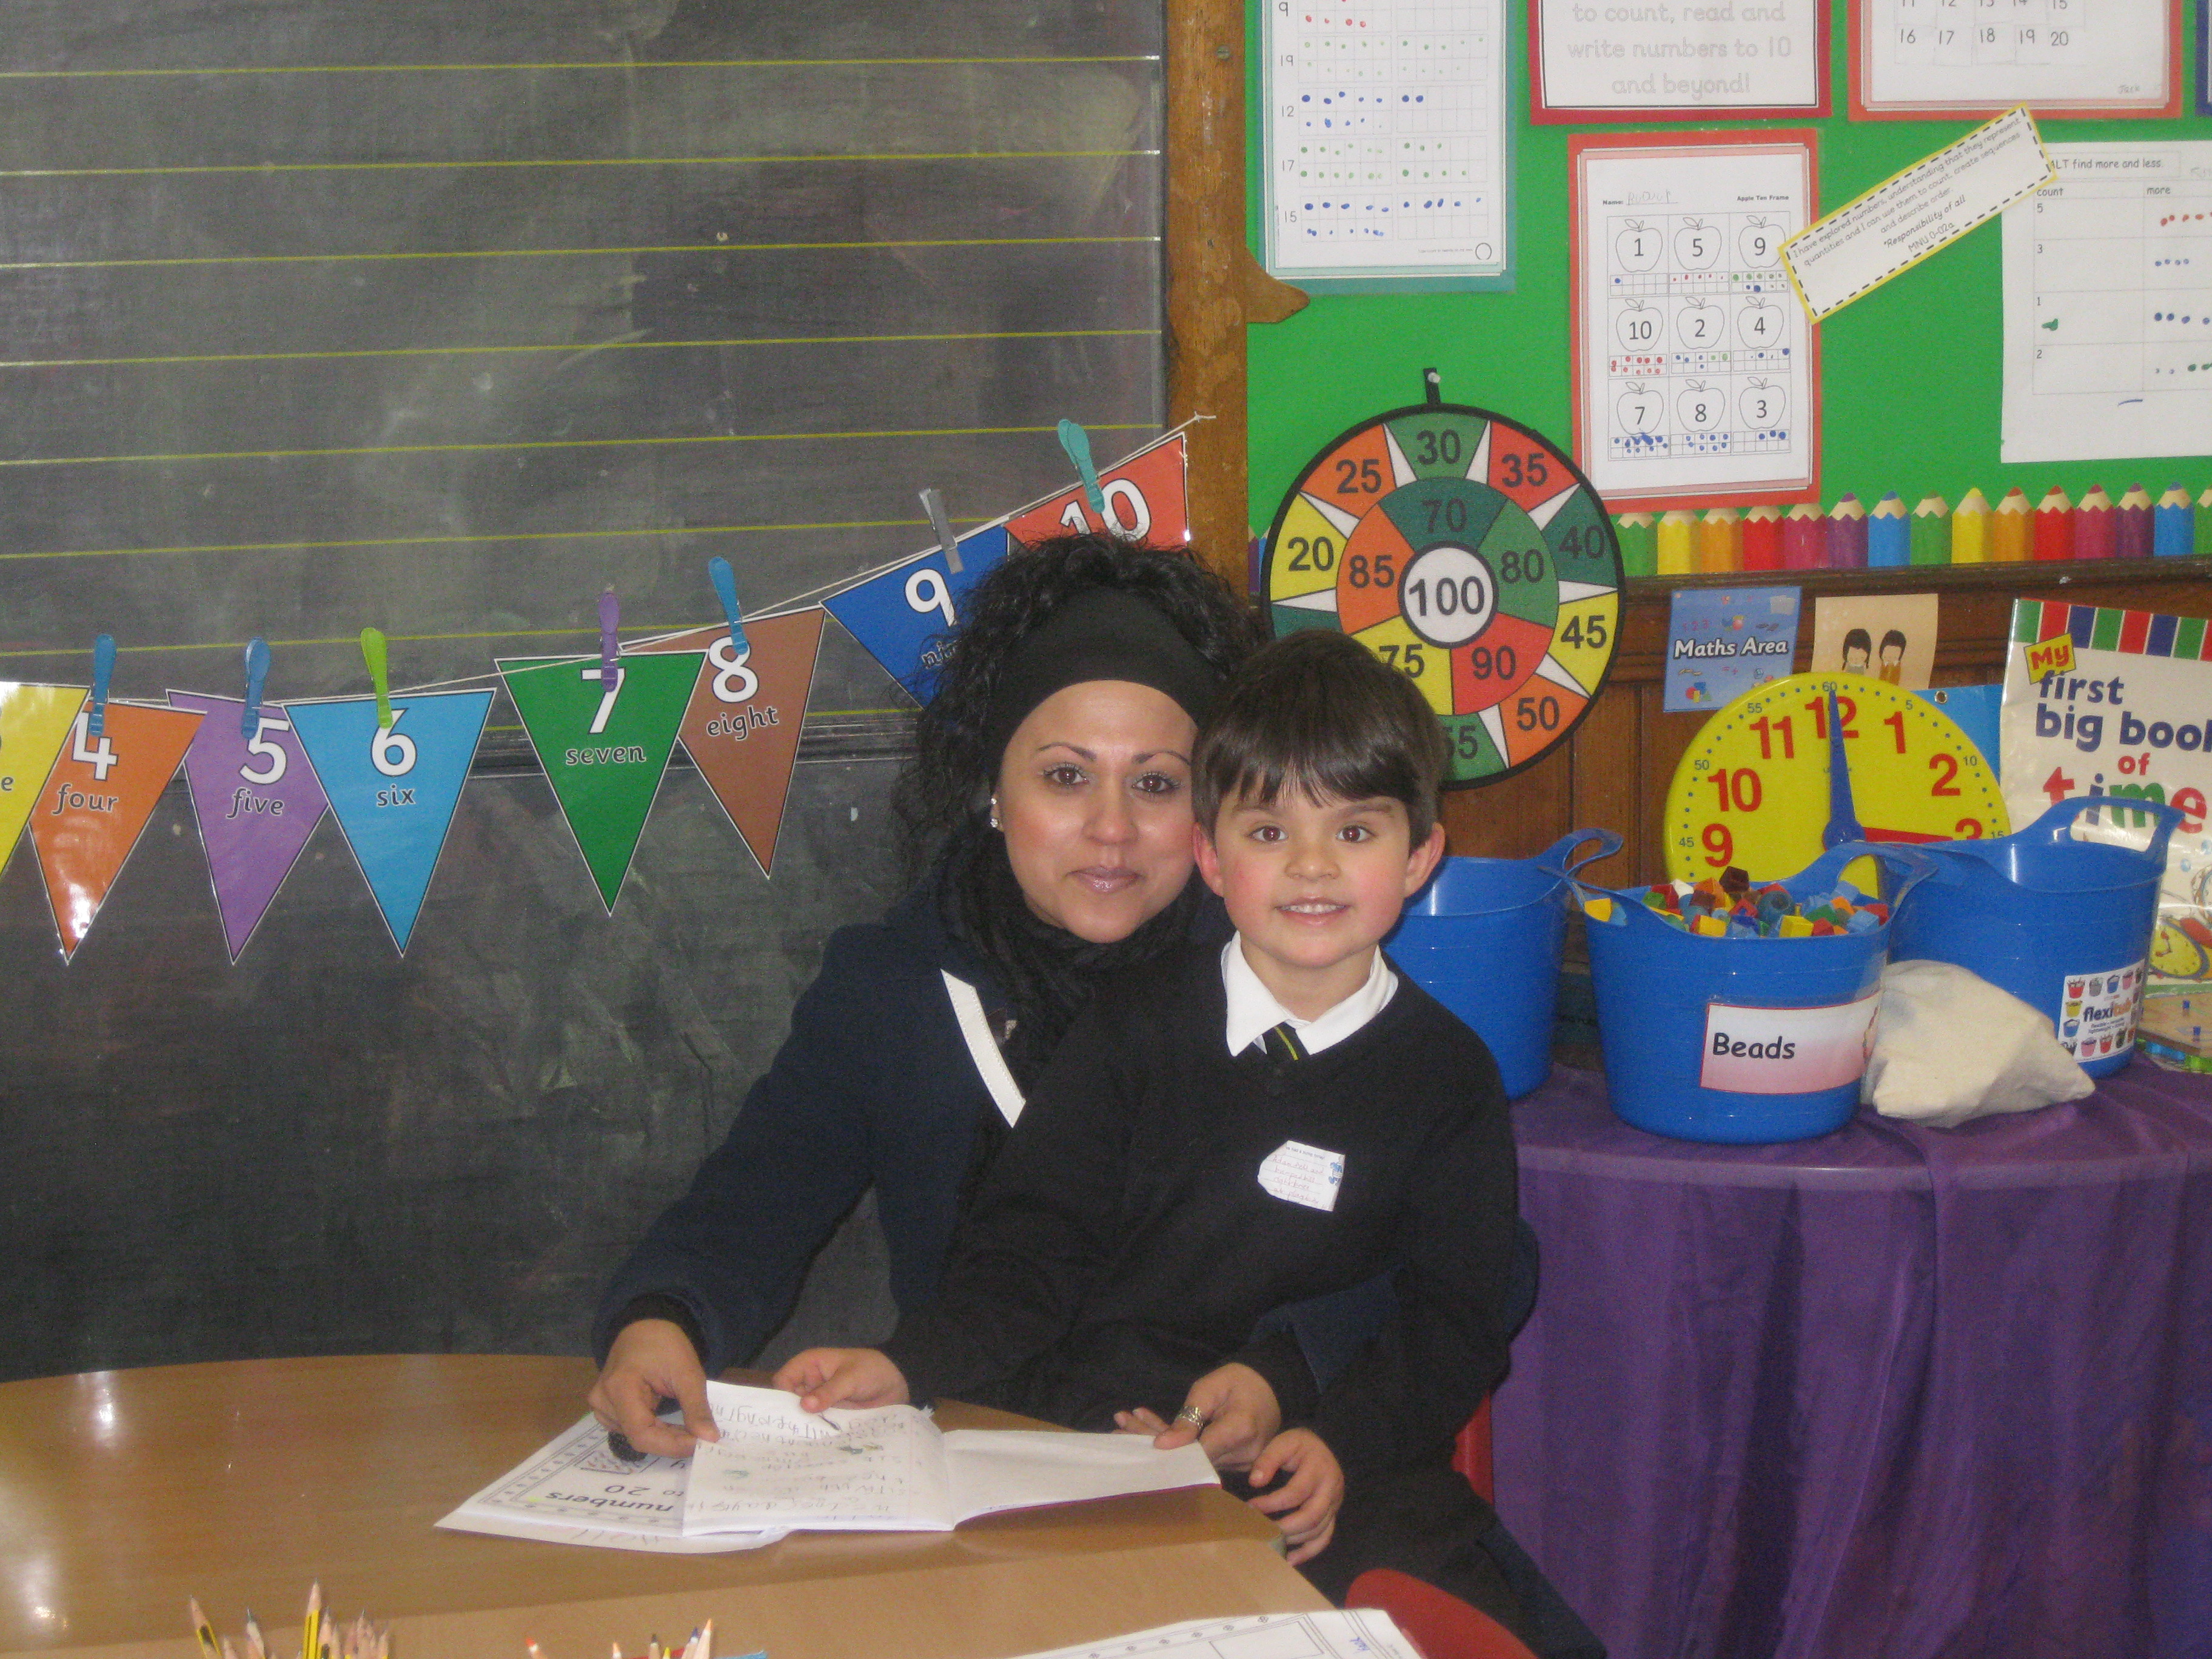 Adan and Mum at the open afternoon!